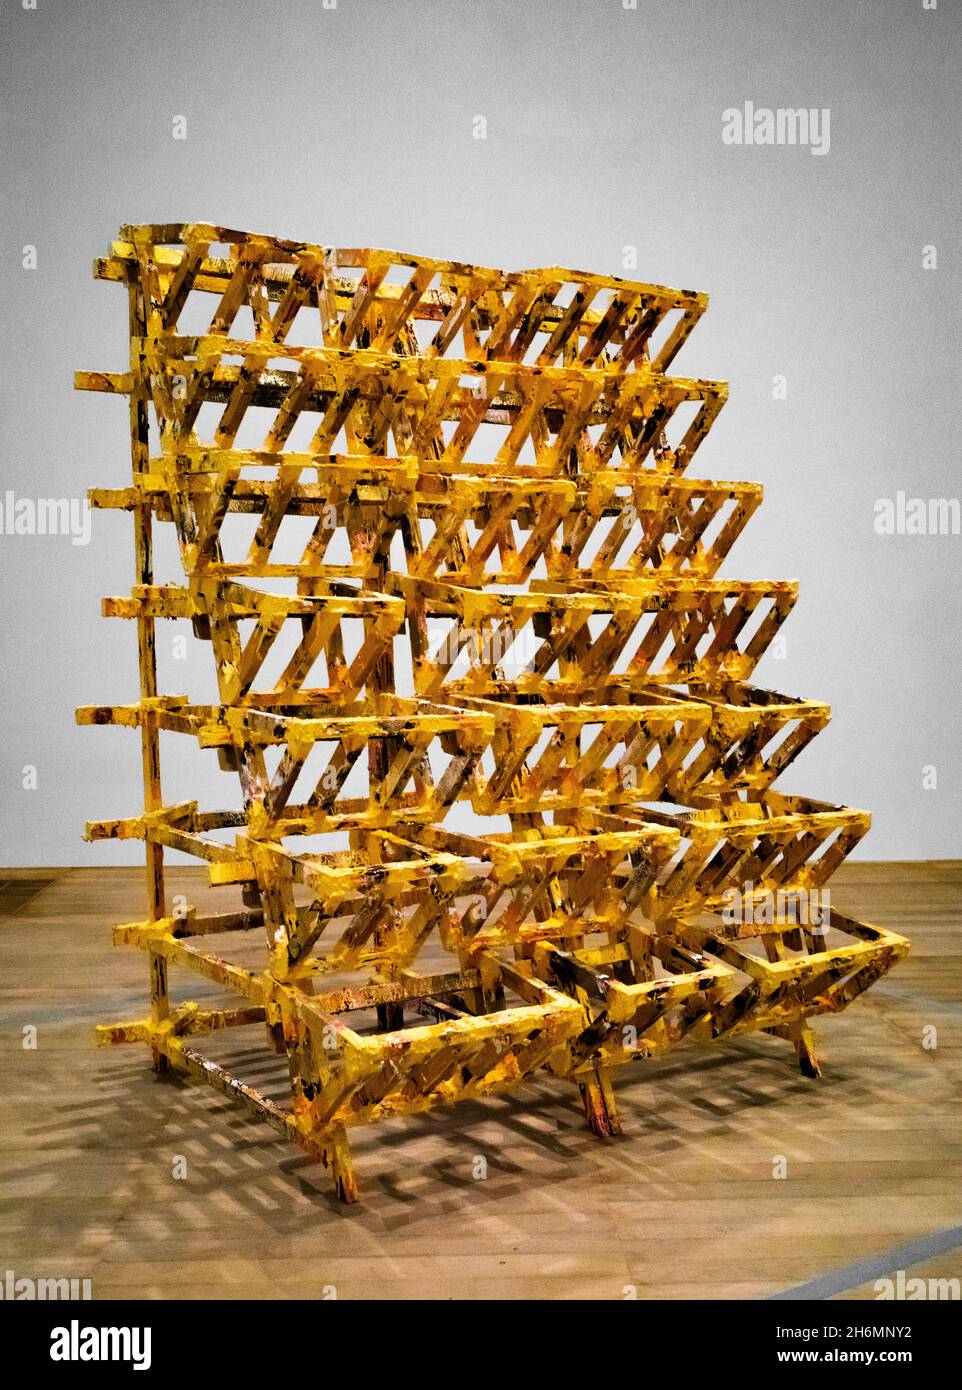 Untitled (Yellow Rack) sculpture by Phyllida Barlow on show at the Tate Modern in London, UK, on 15 November 2021. Stock Photo